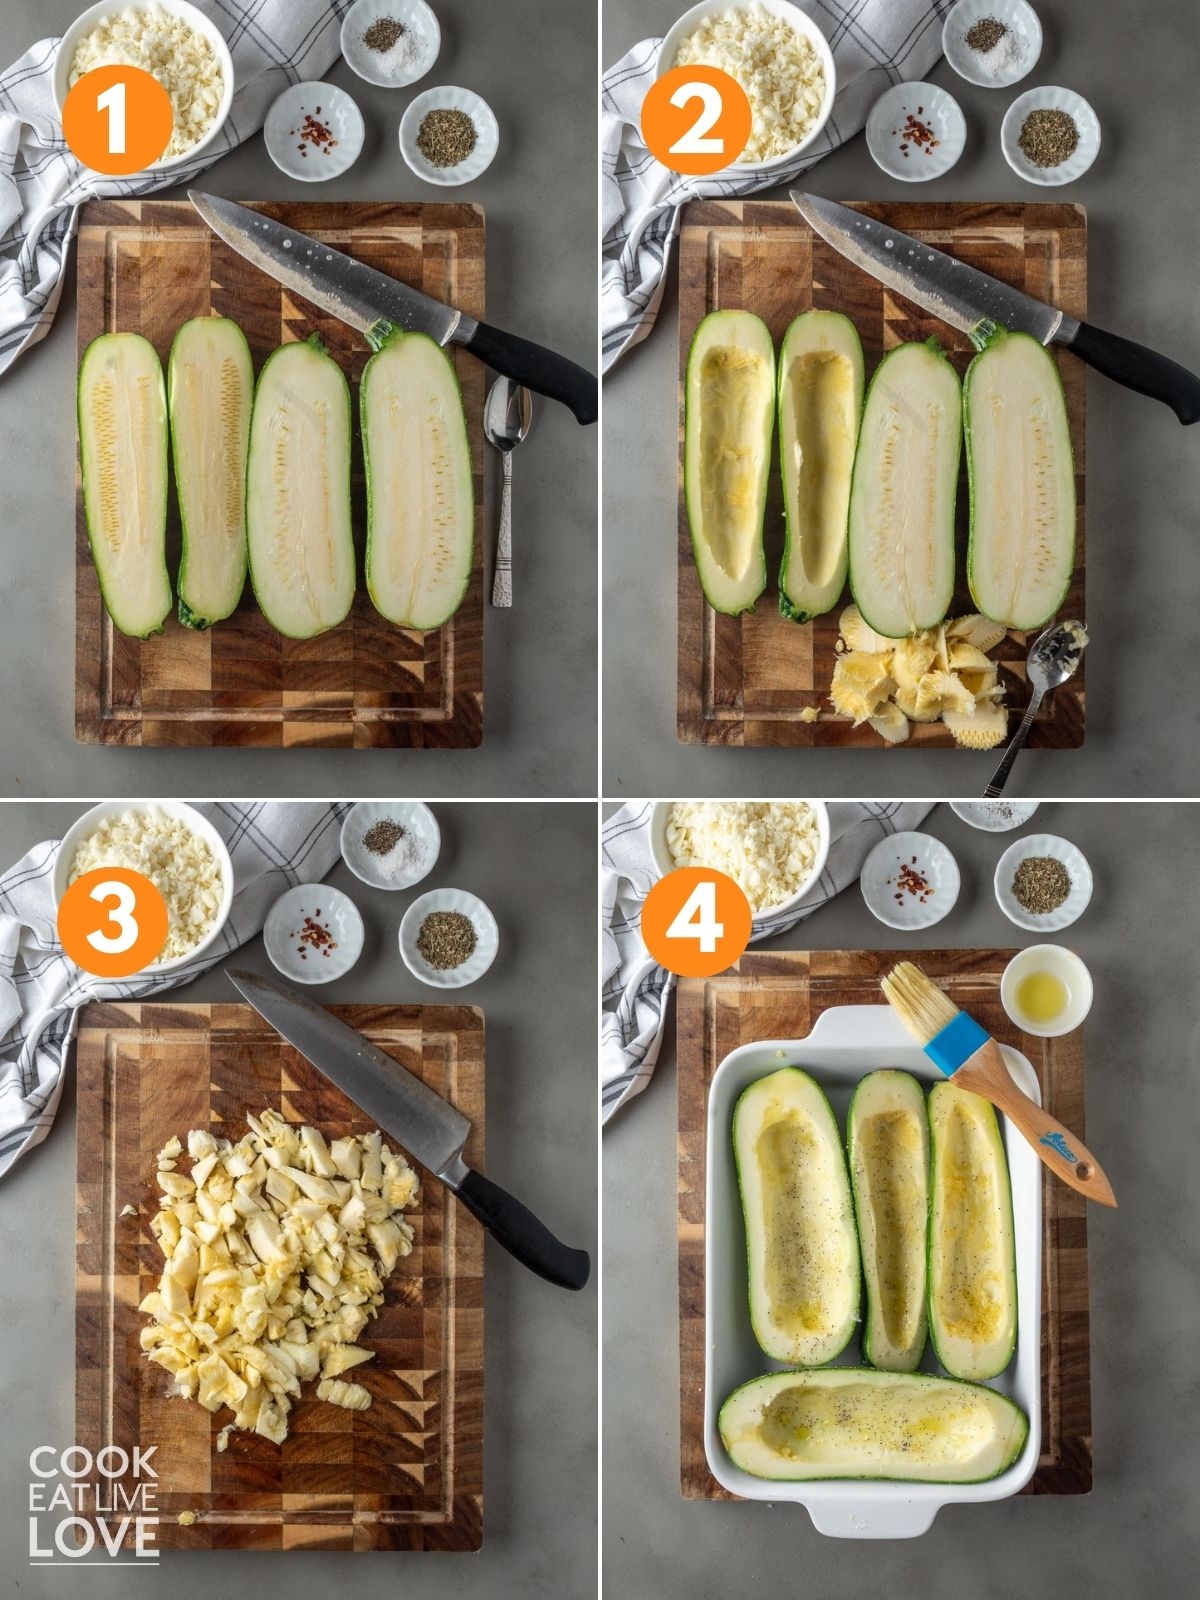 A collage of images with zucchini cut in half, scooped out, insides on a cutting board to chop, and in a baking dish to roast.